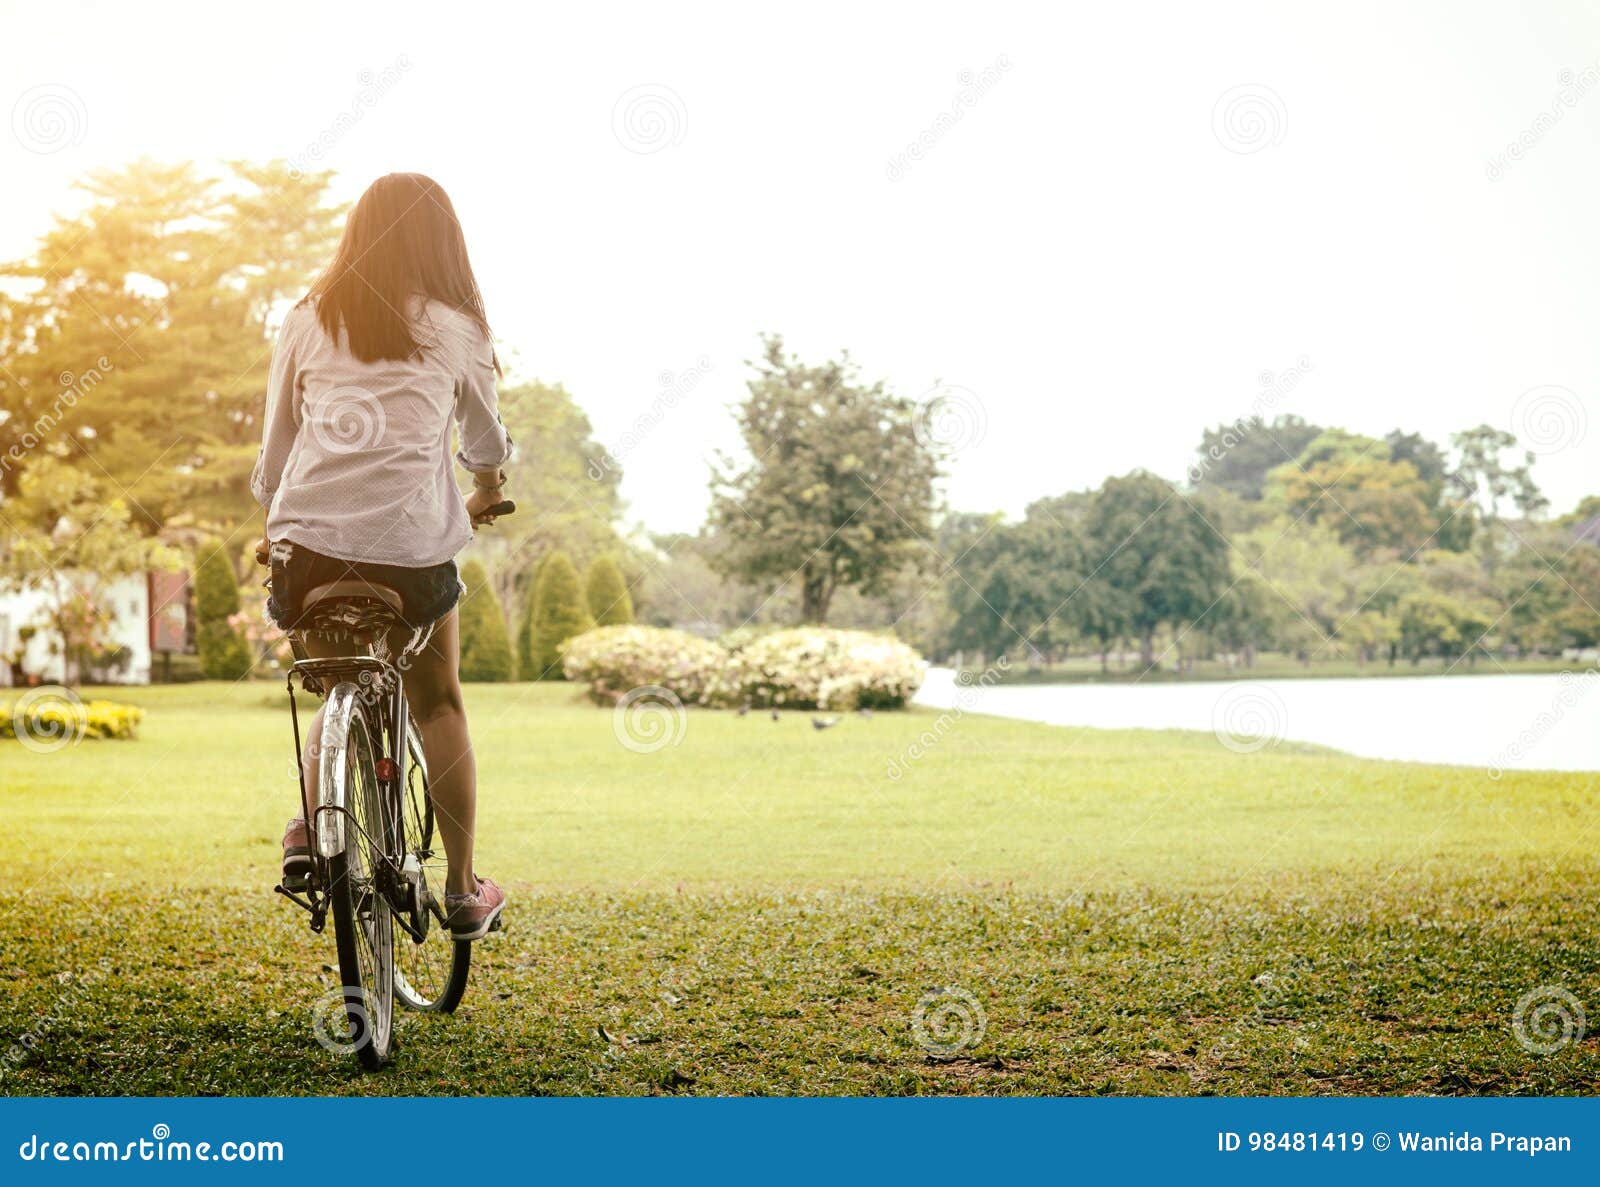 woman riding a bicycle in a park outdoor at summer day. active people. lifestyle concept.